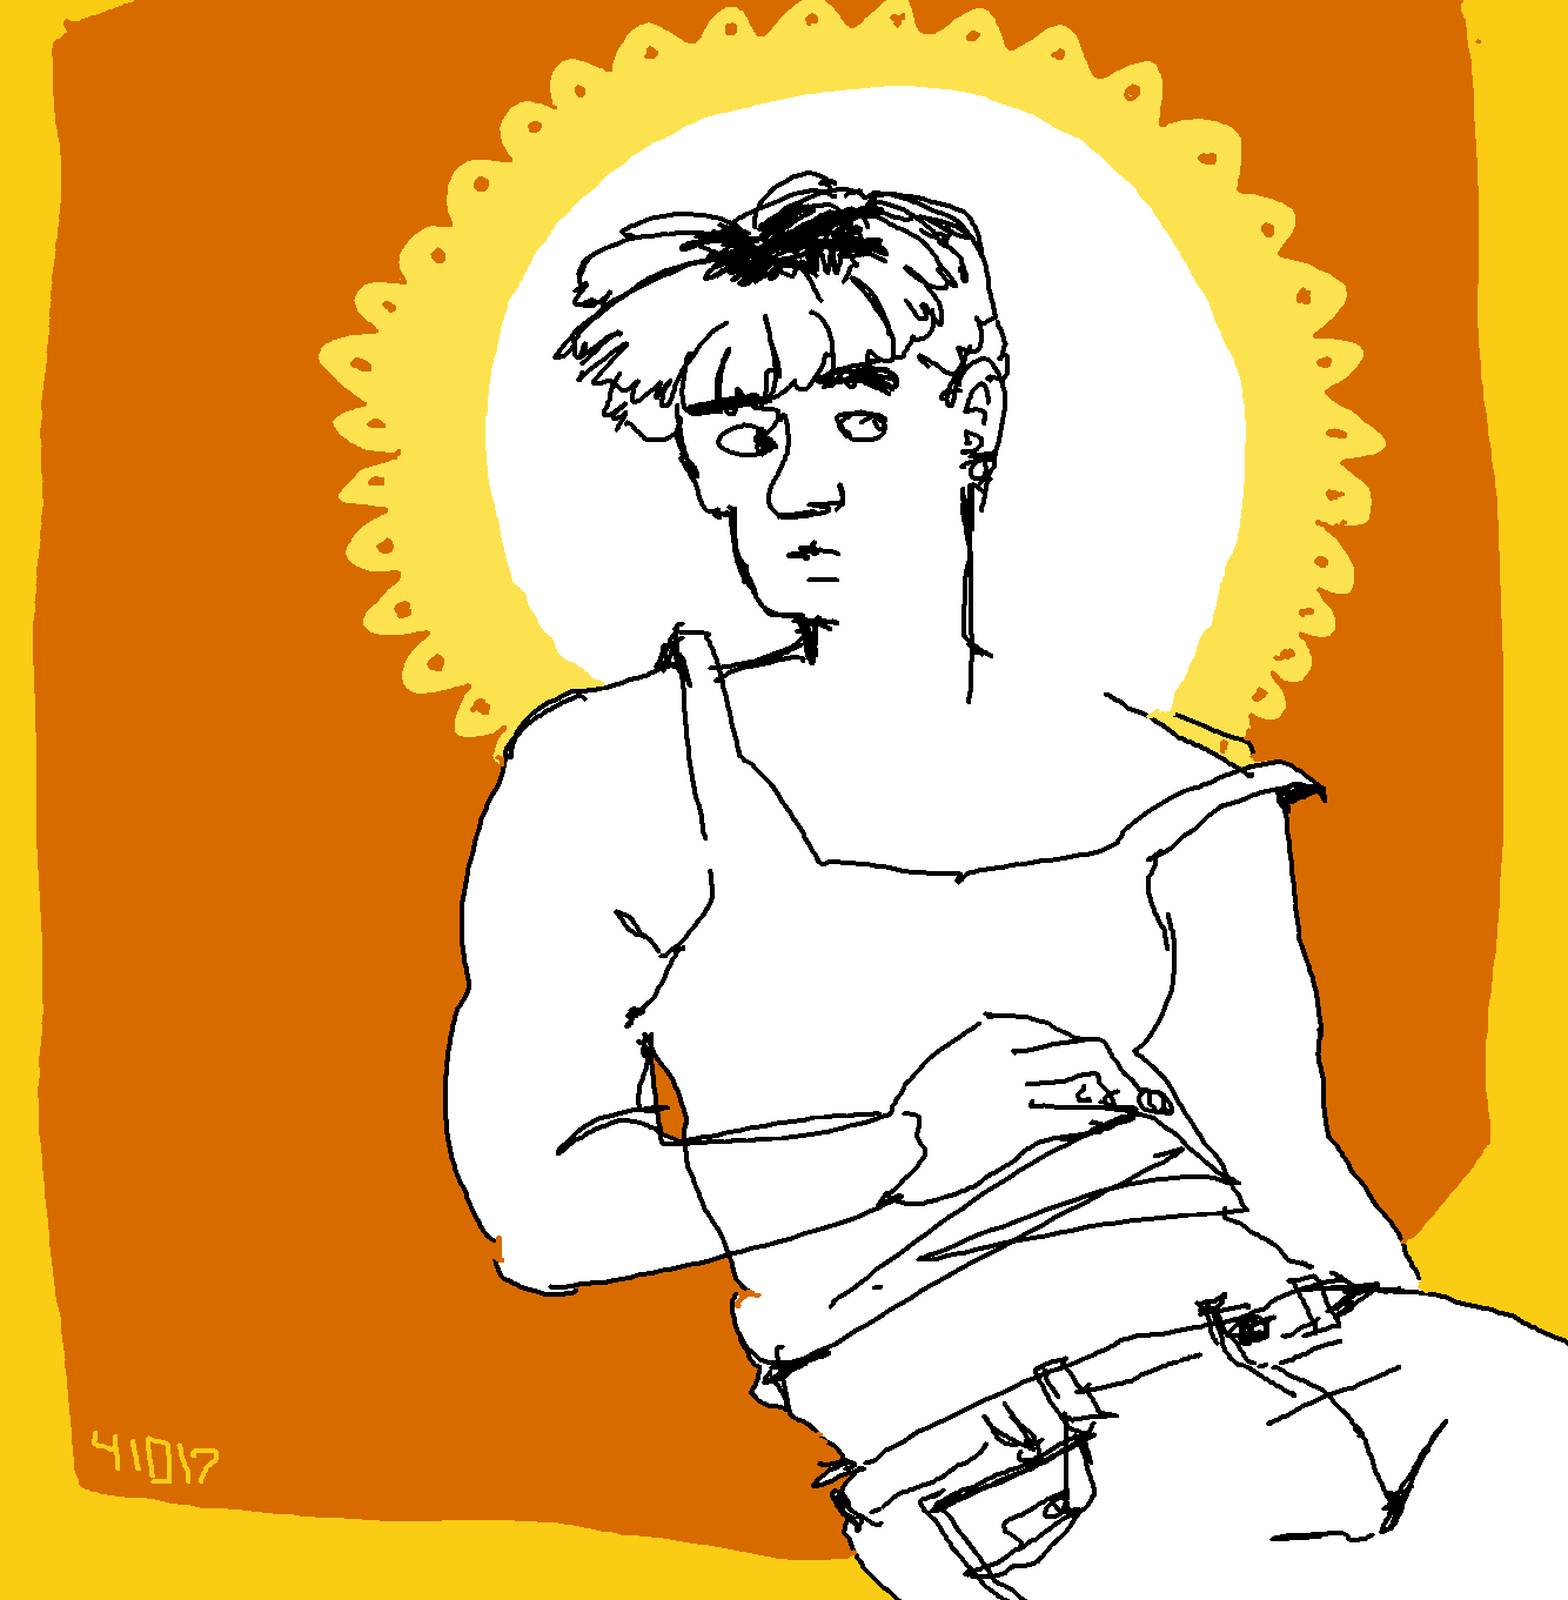 Sketch of a person on orange background